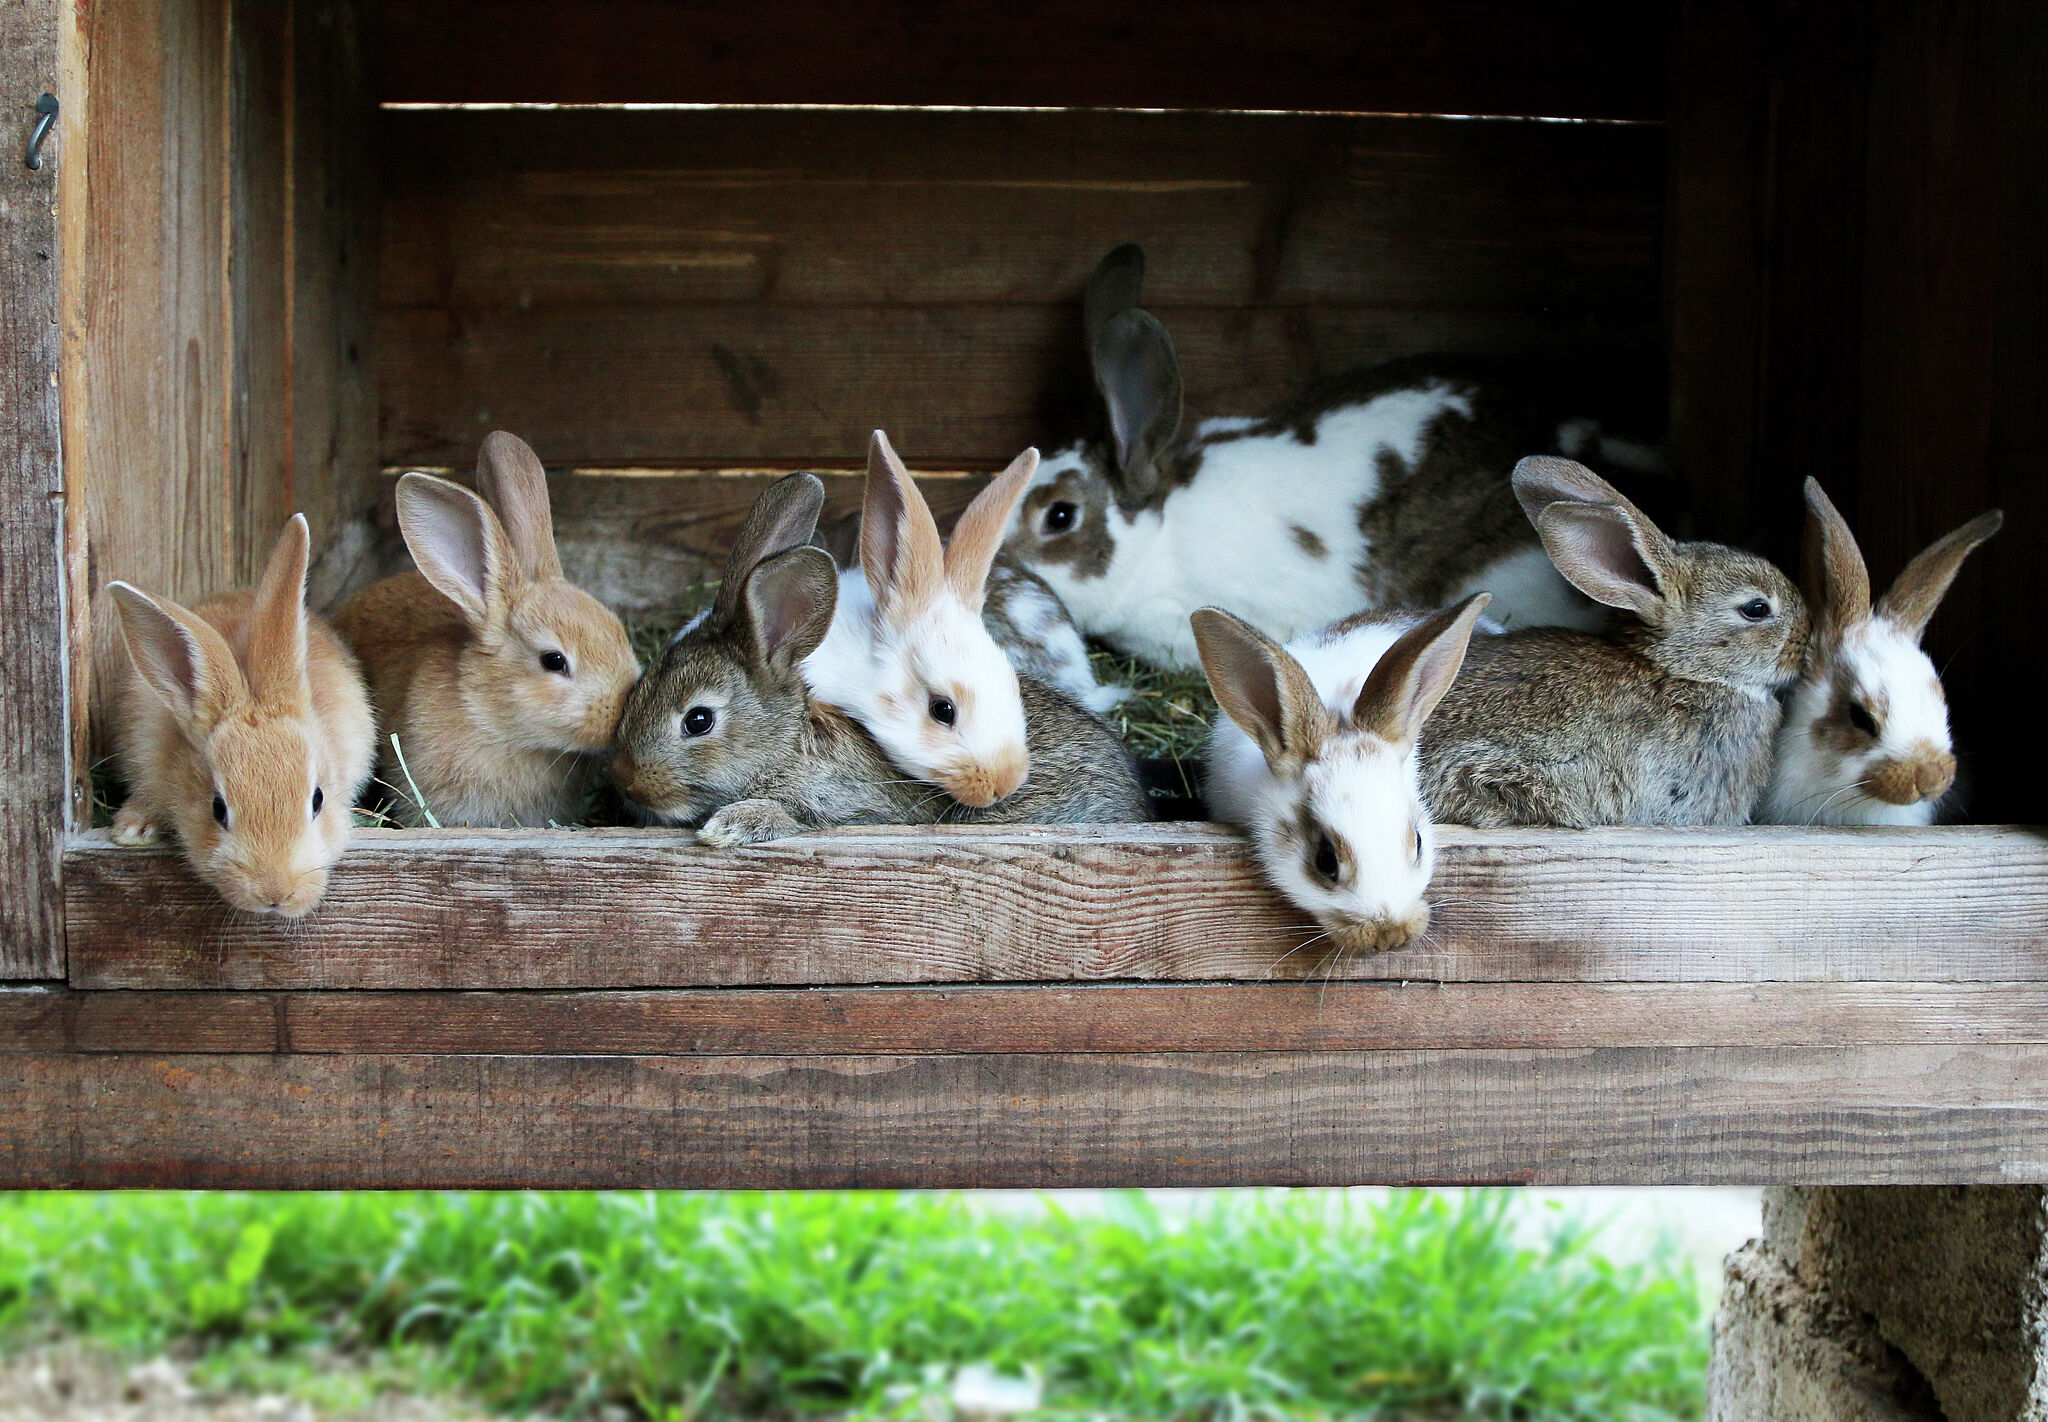 Rare virus wipes out all rabbits at Bay Area petting zoo - SFGATE